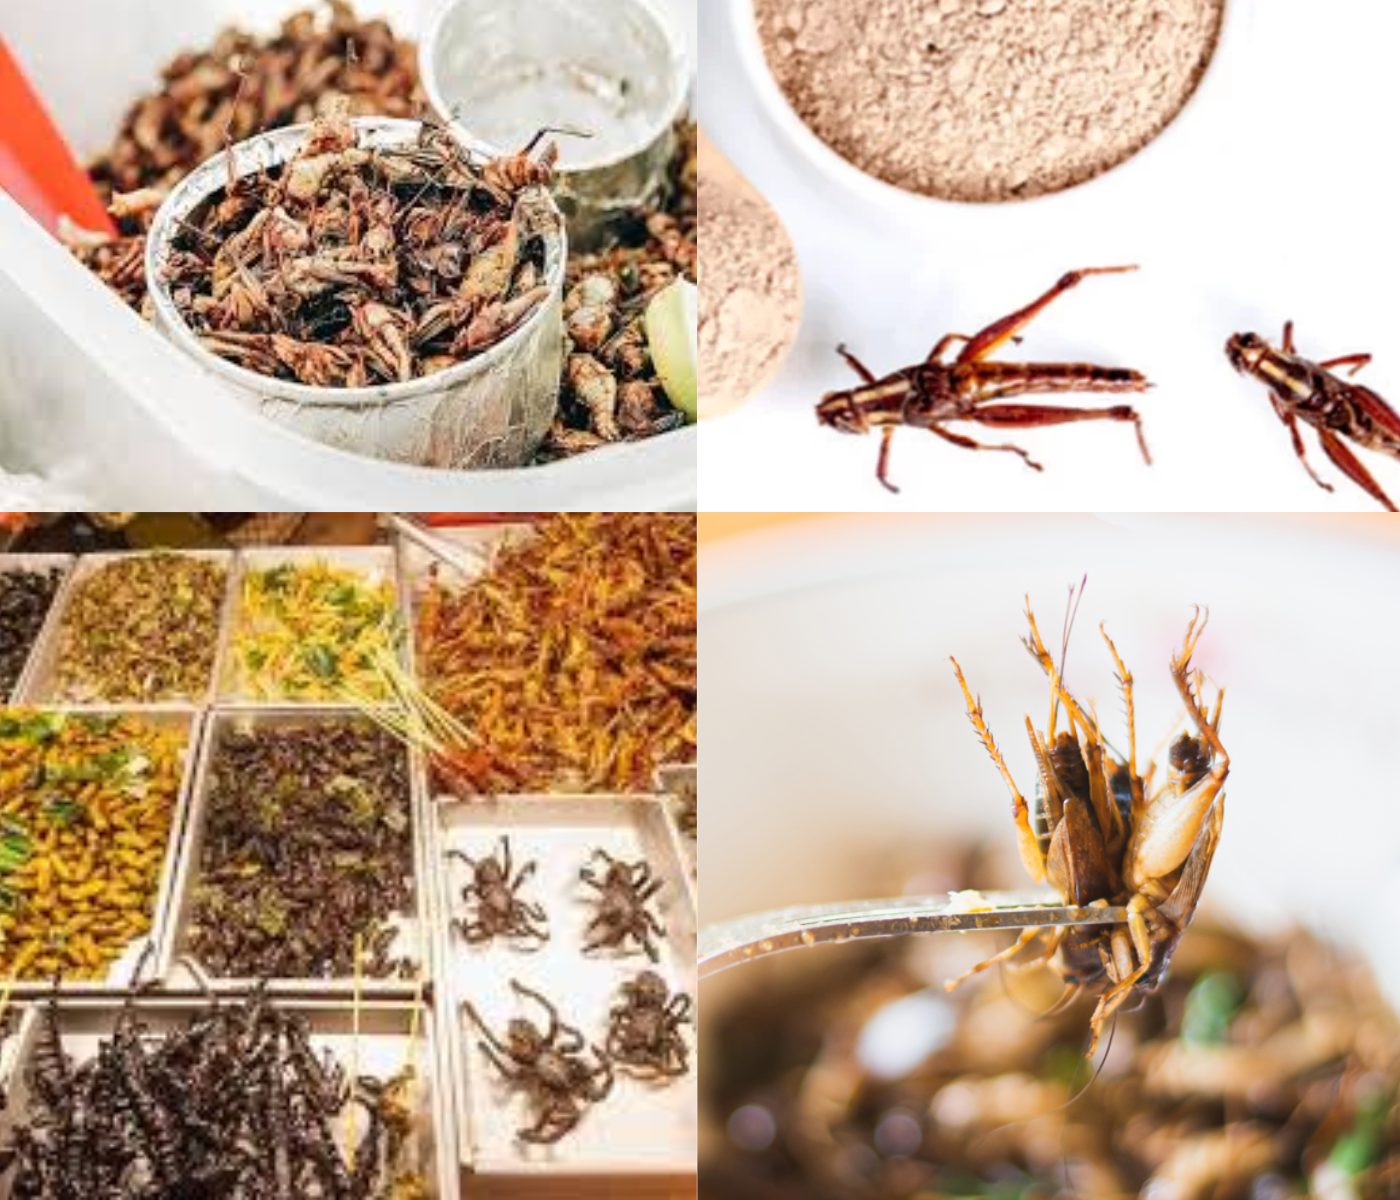 East African Scientists Lead Global Effort for Insect Protein